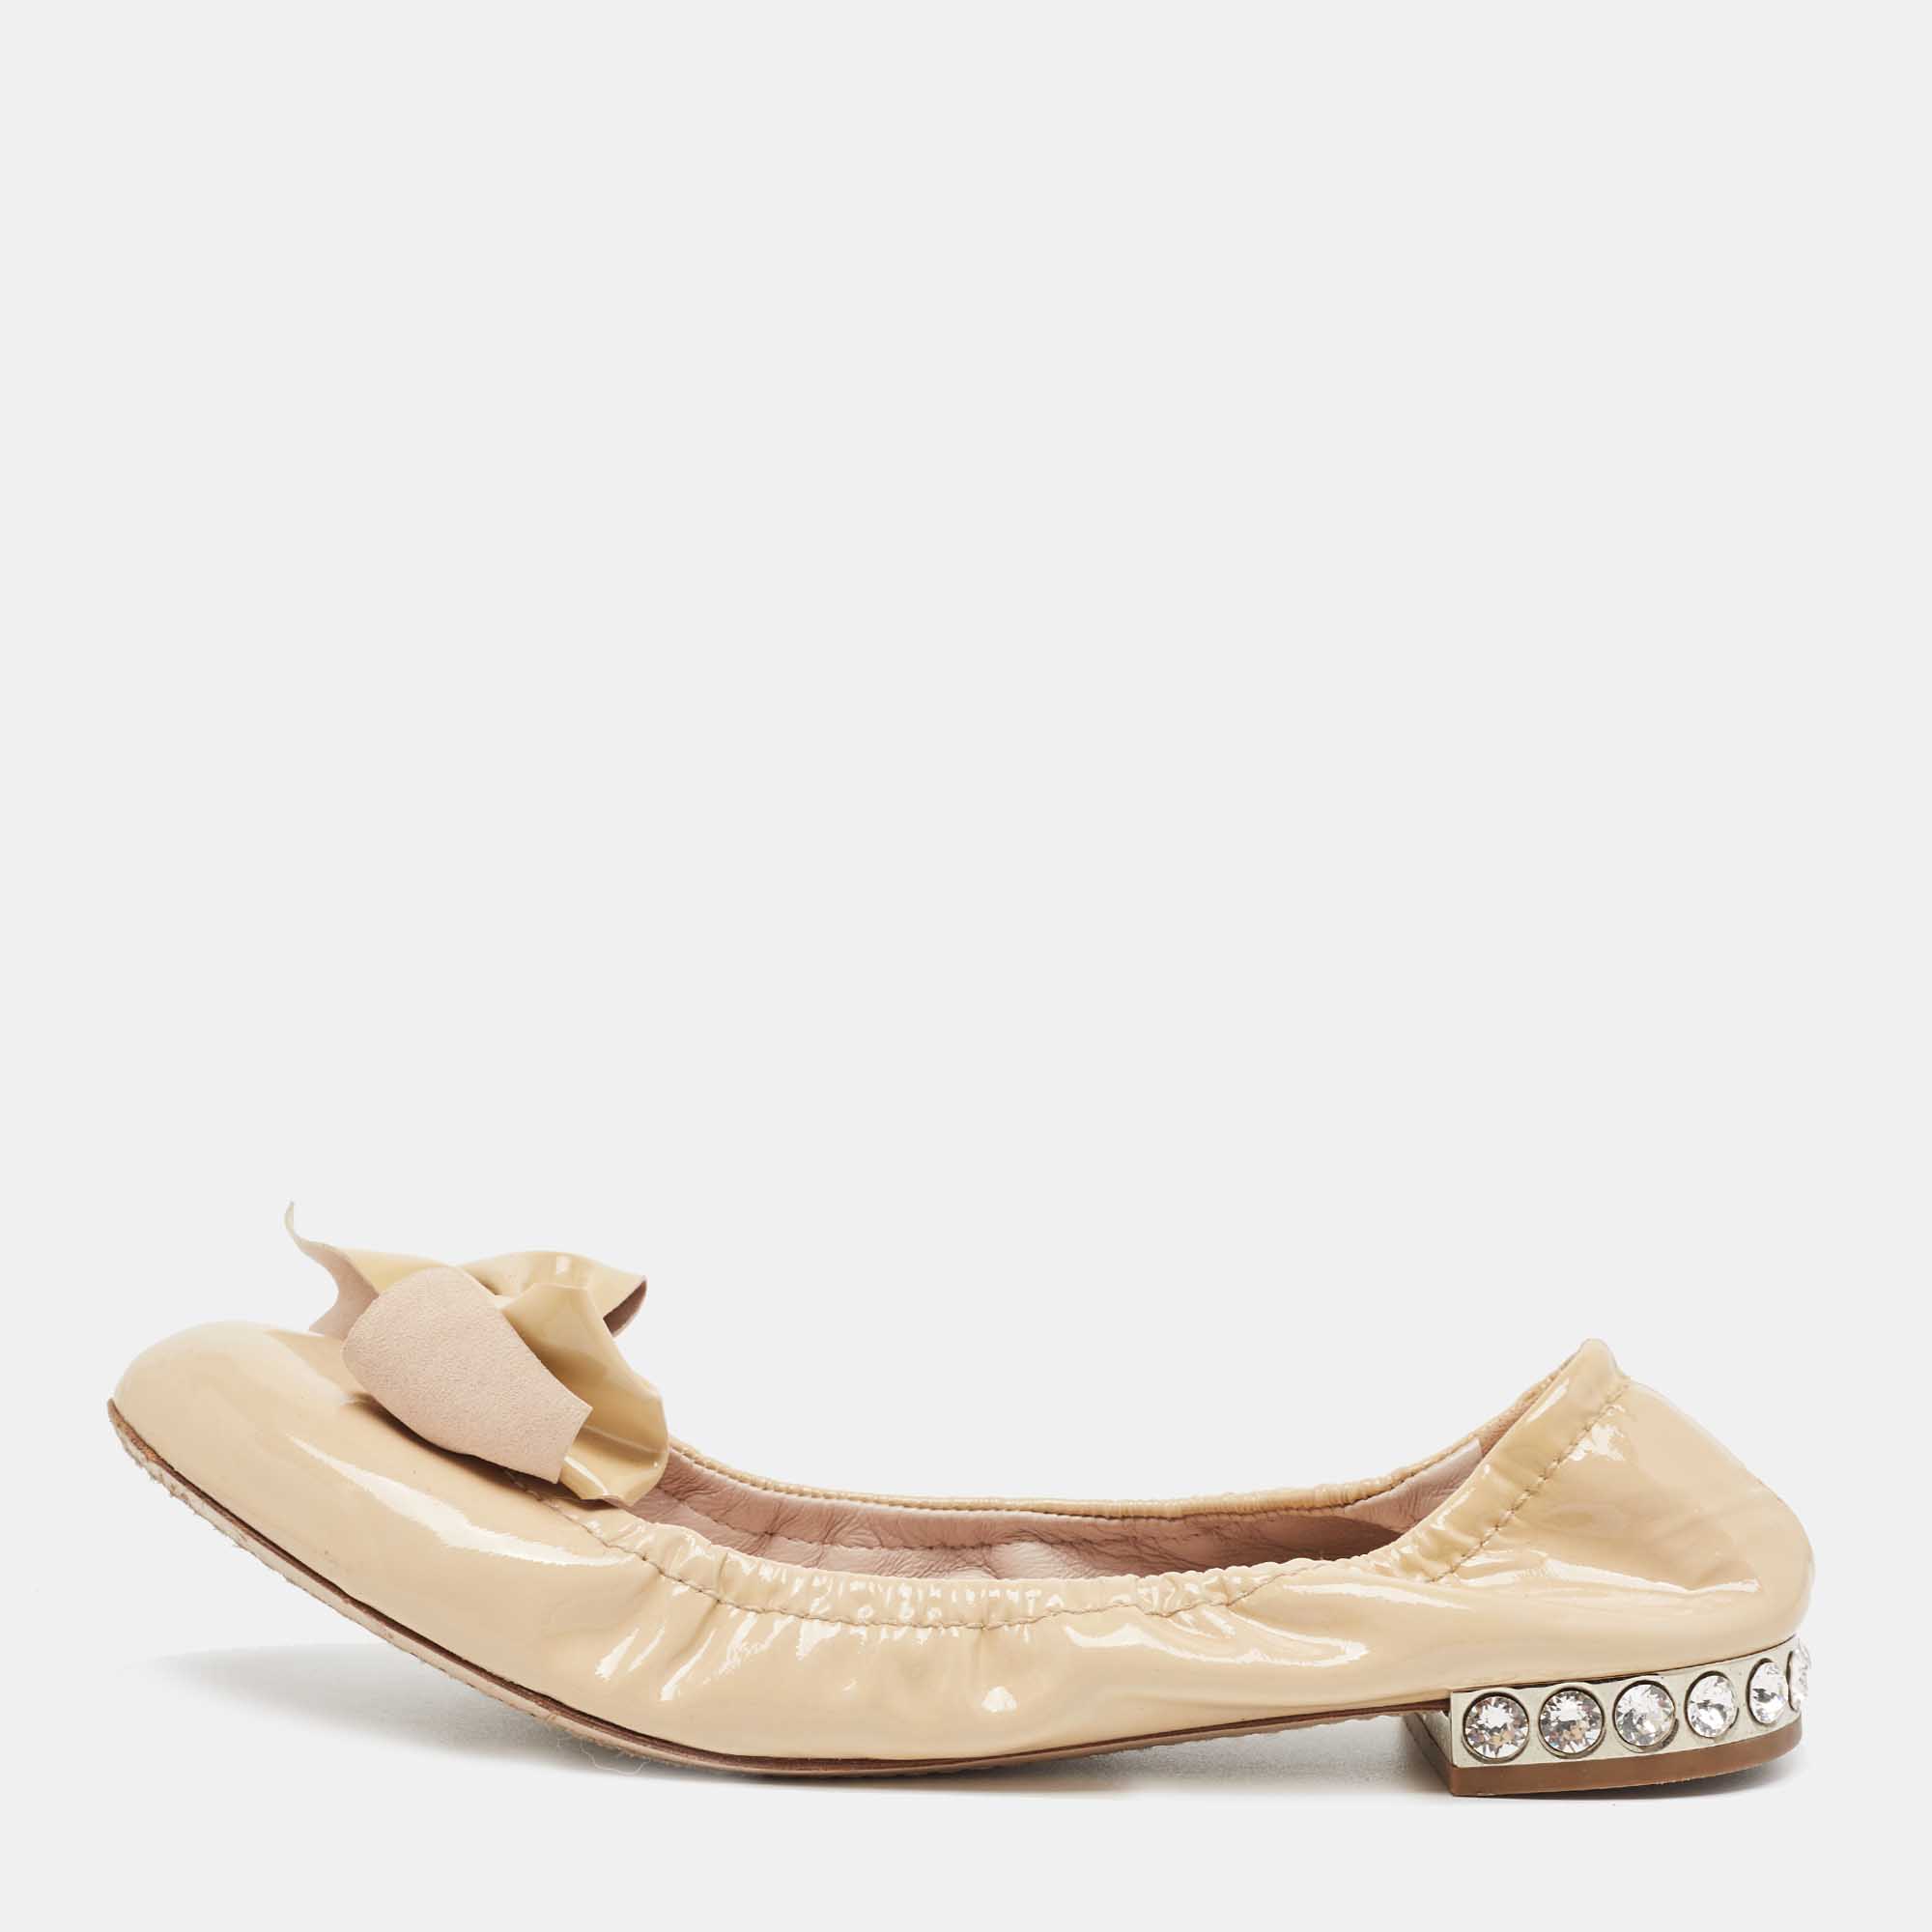 Pre-owned Miu Miu Beige/gold Patent Leather Bow Detail Crystal Embellished Heel Scrunch Ballet Flats Size 36.5